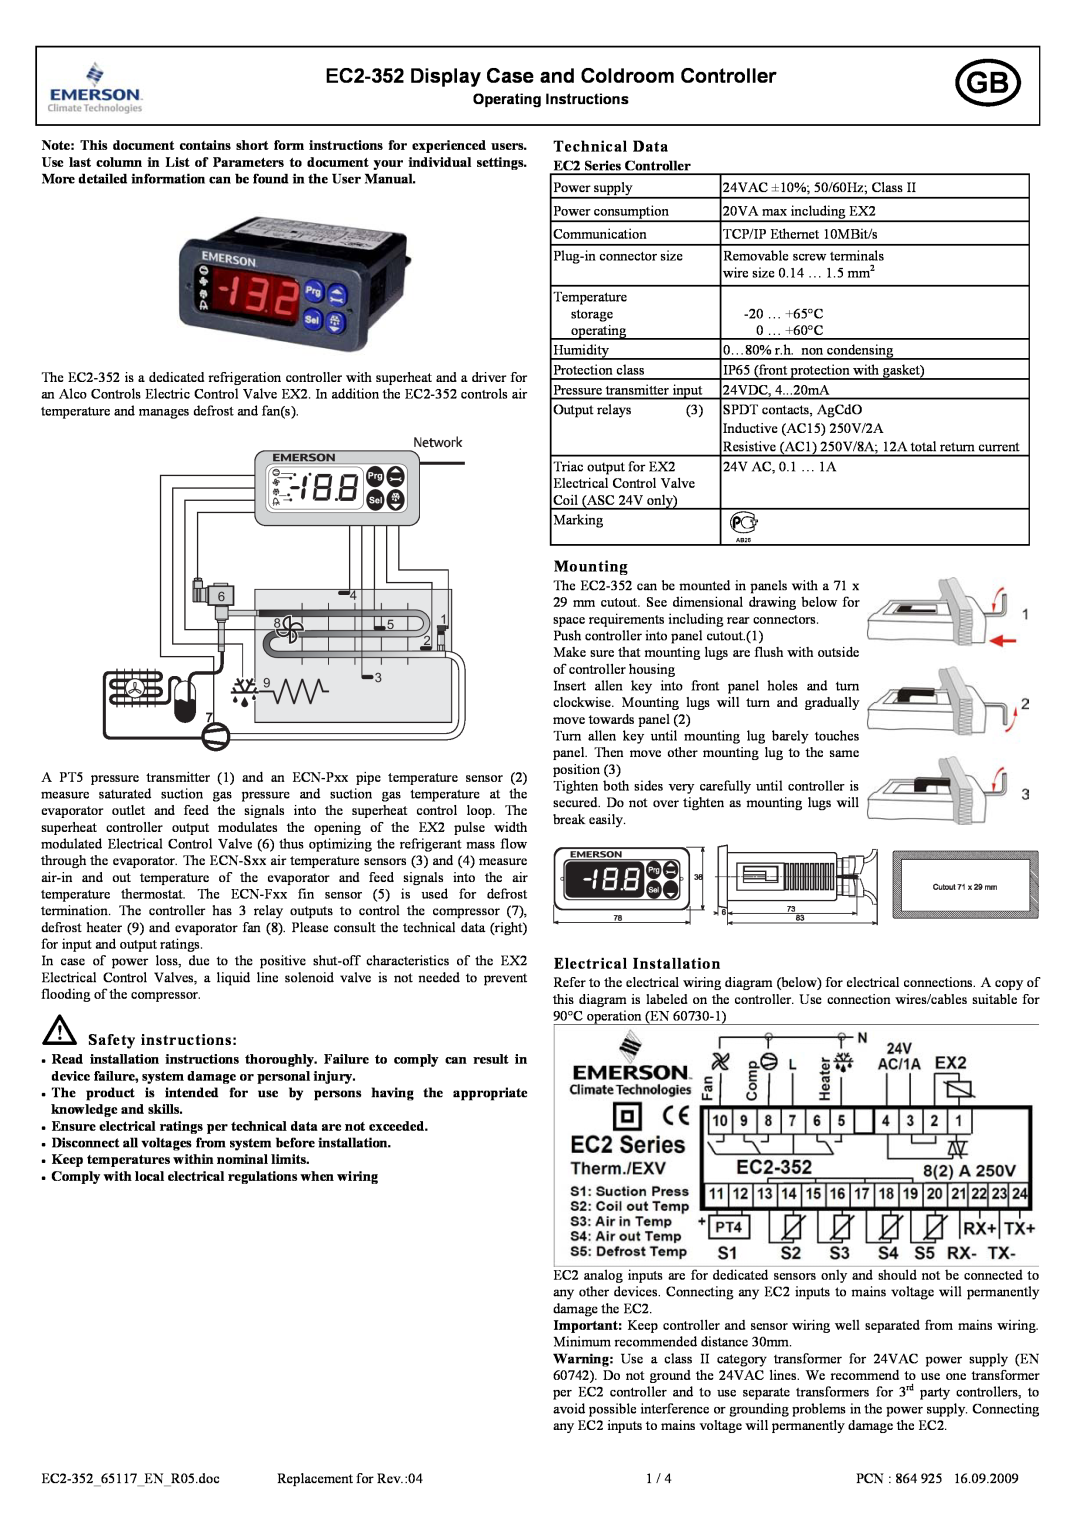 Emerson Process Management user manual EC2-352 Display Case and Coldroom Controller, Safety instructions, Mounting 